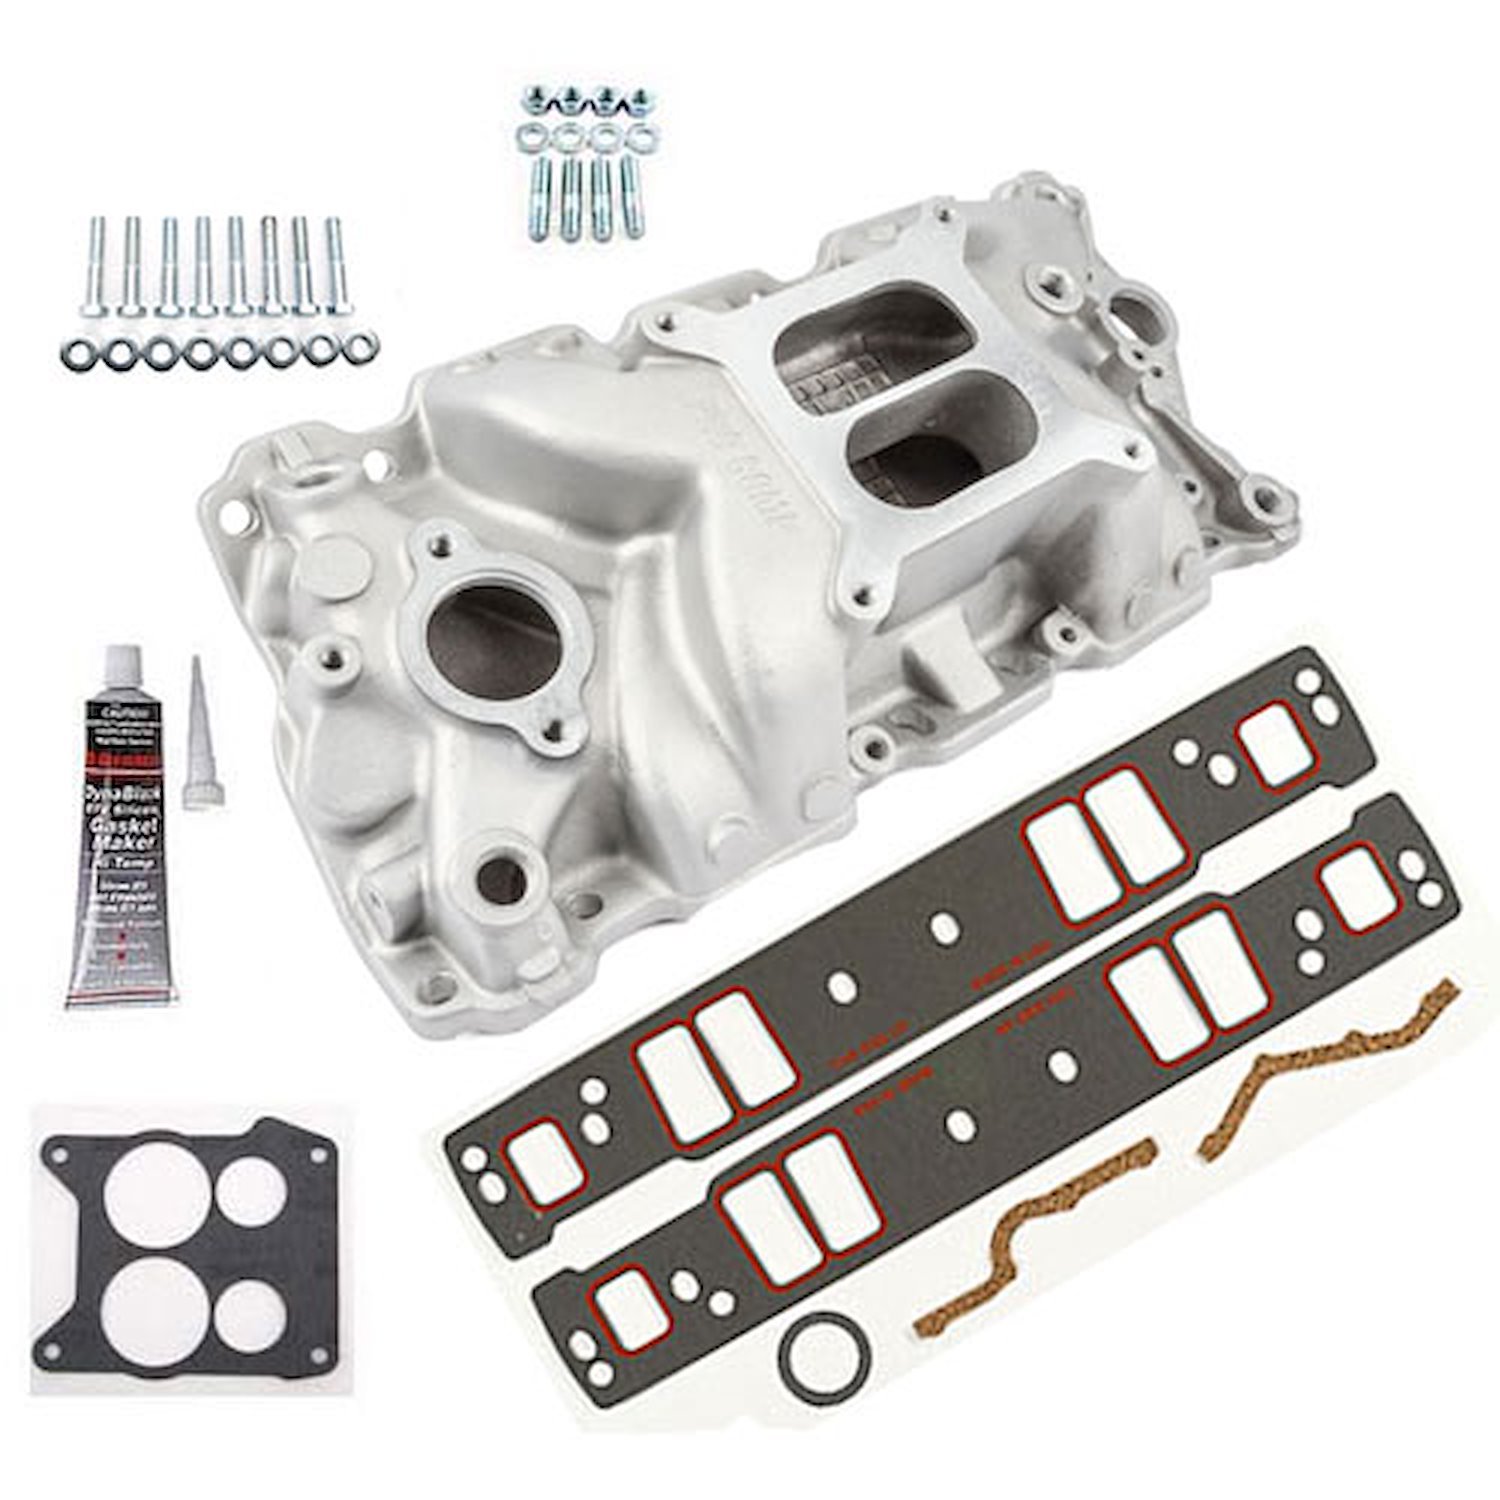 Qualifier Intake Kit 1957-1995 Small Block Chevy 350 Includes: